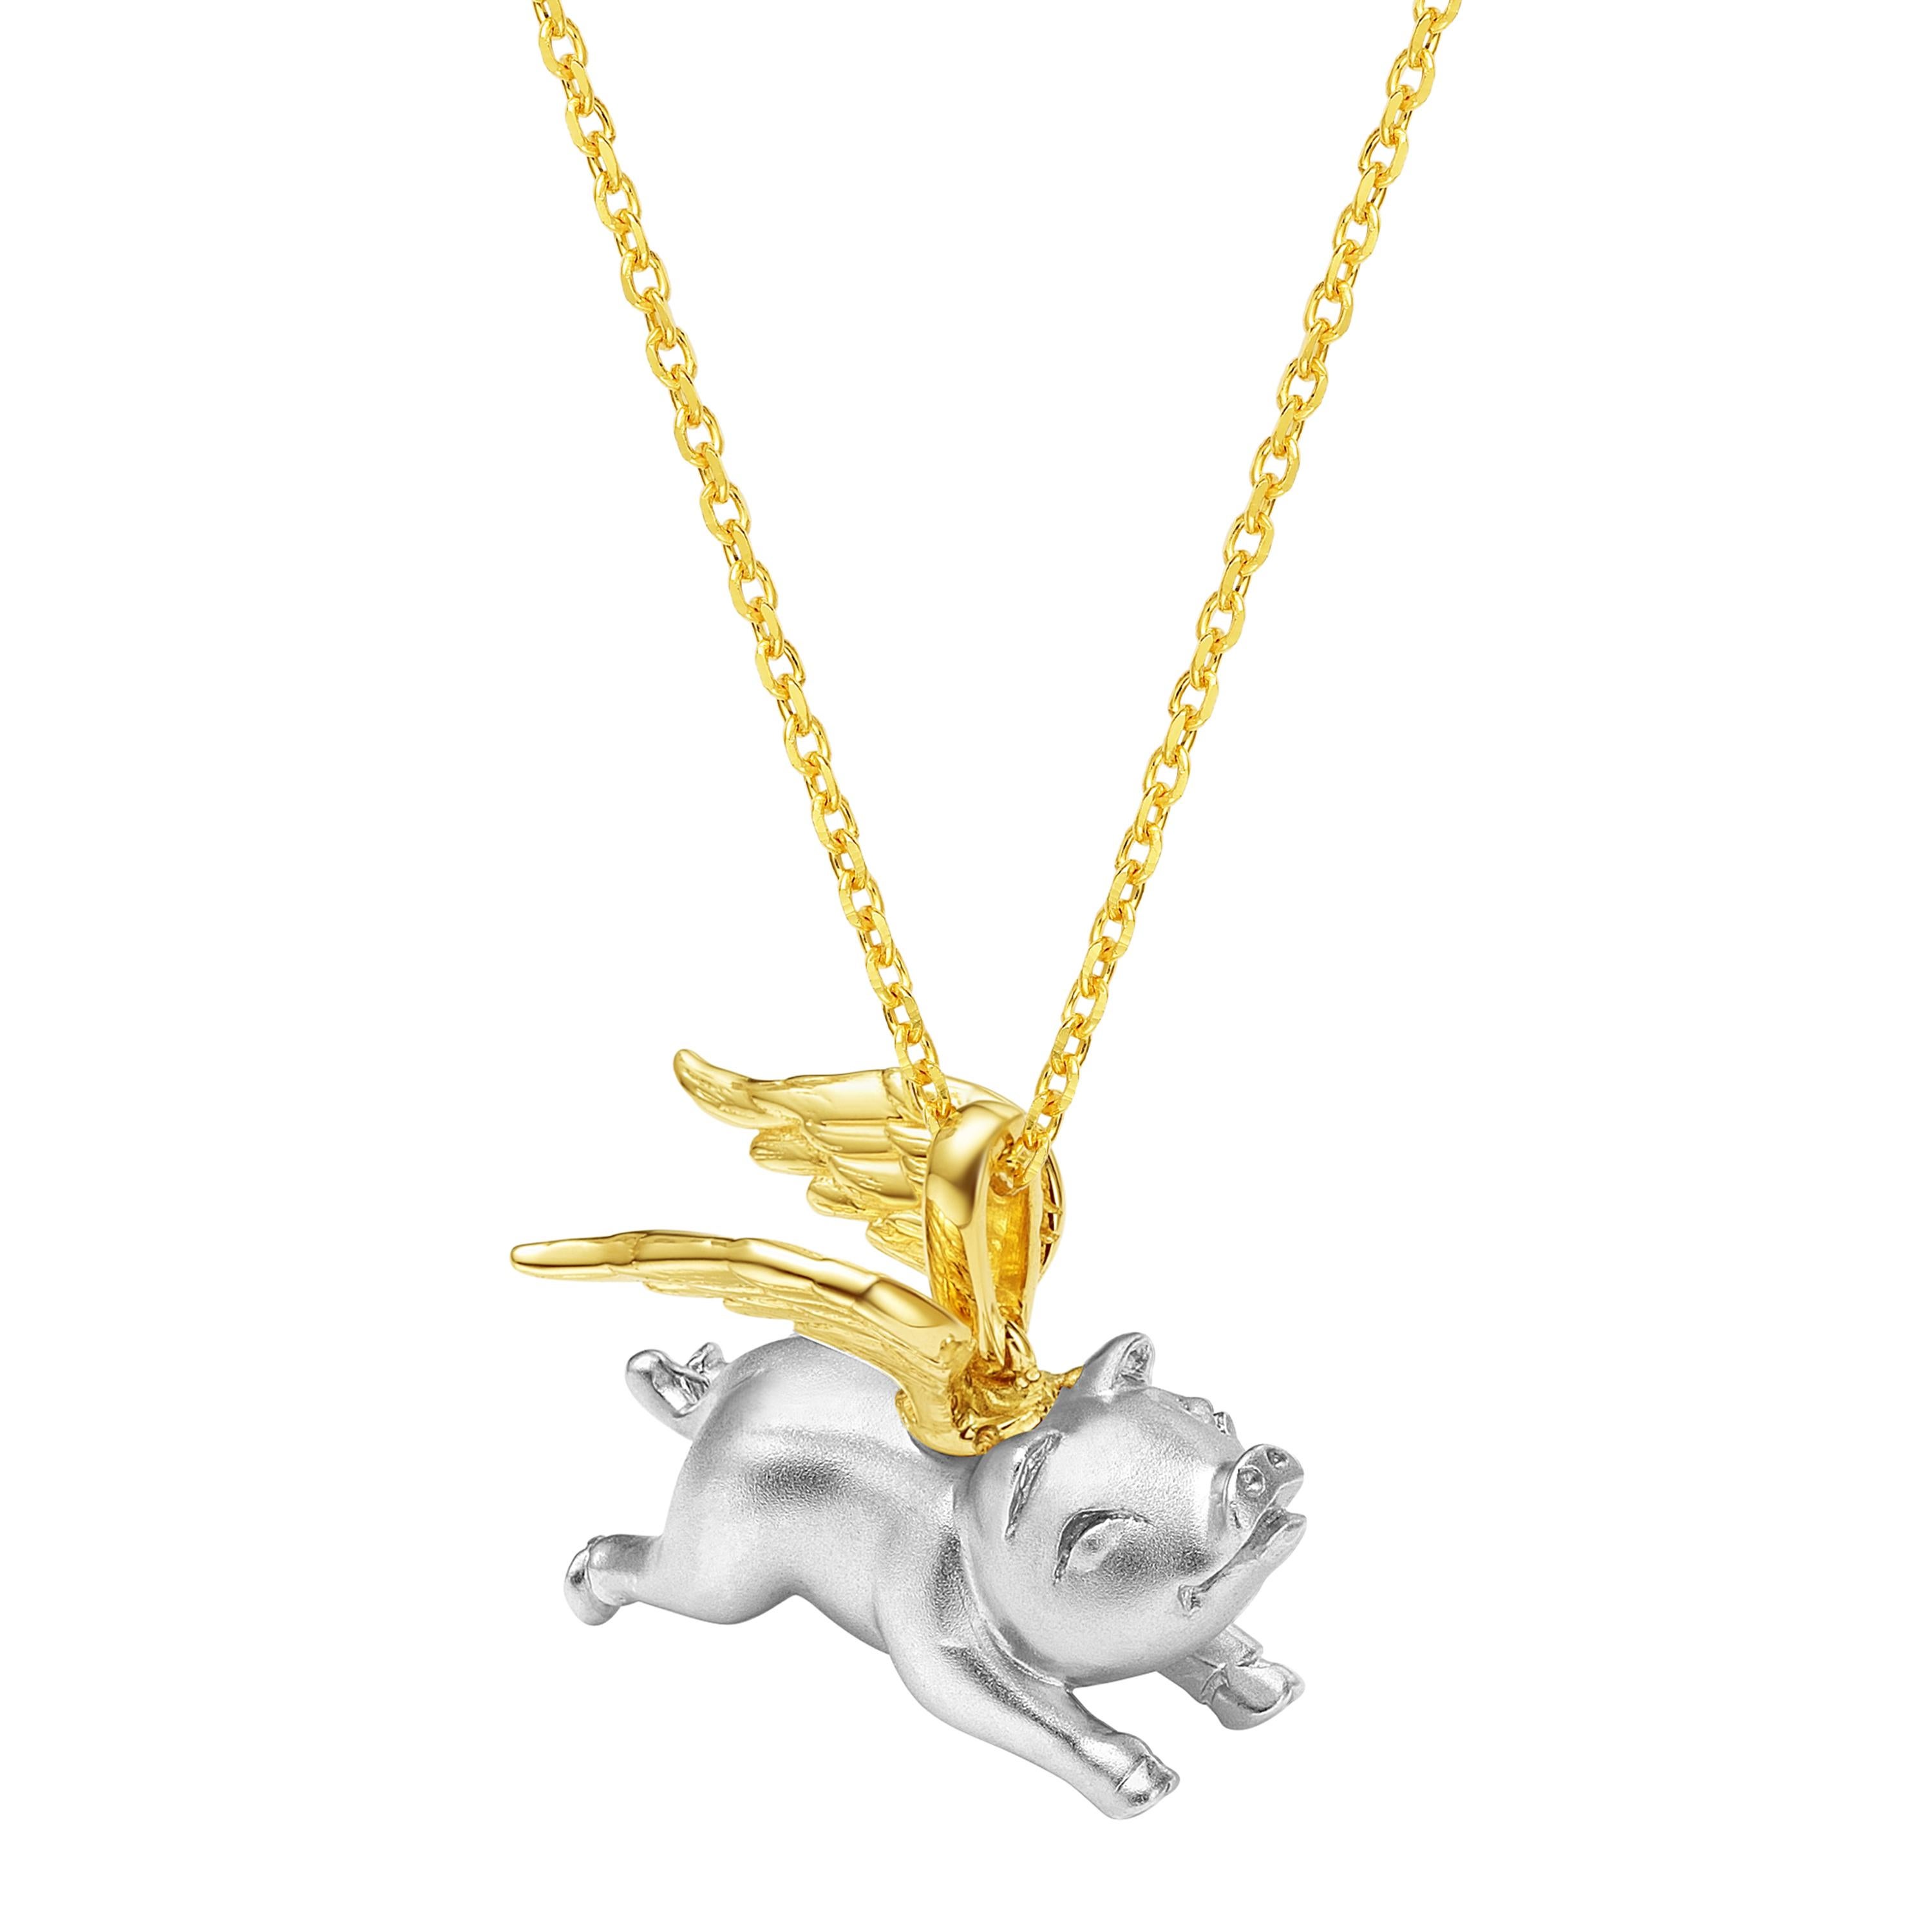 Pig pendant with a hand-carved solid silver pig and yellow gold plated fluttering wings. It comes packaged with a 16-inch + 2-inch extension 14k yellow gold plated sterling silver chain.

Capturing the festive spirit and traditions of Chinese New